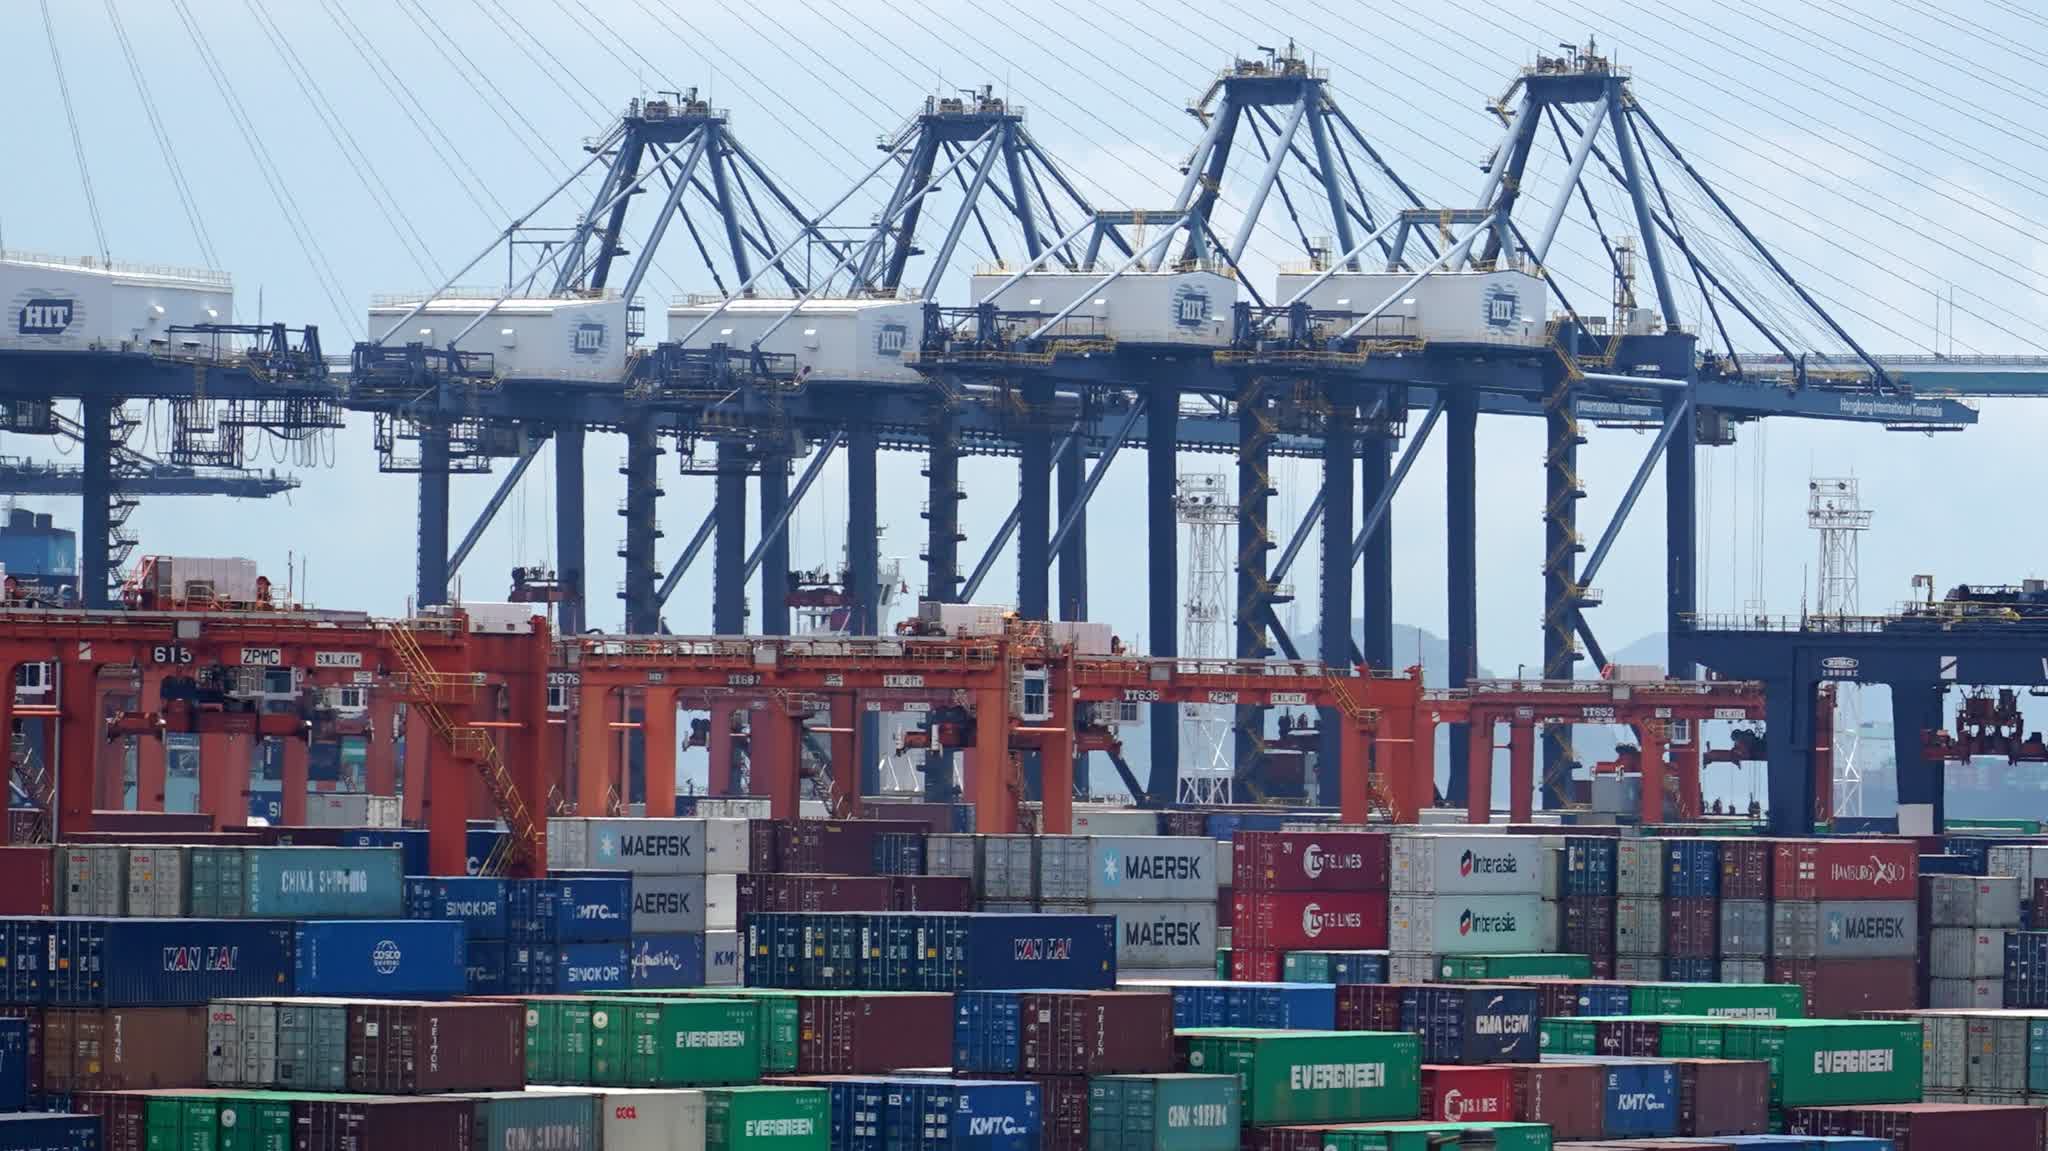 HK's exports value up 33.6% in Jan